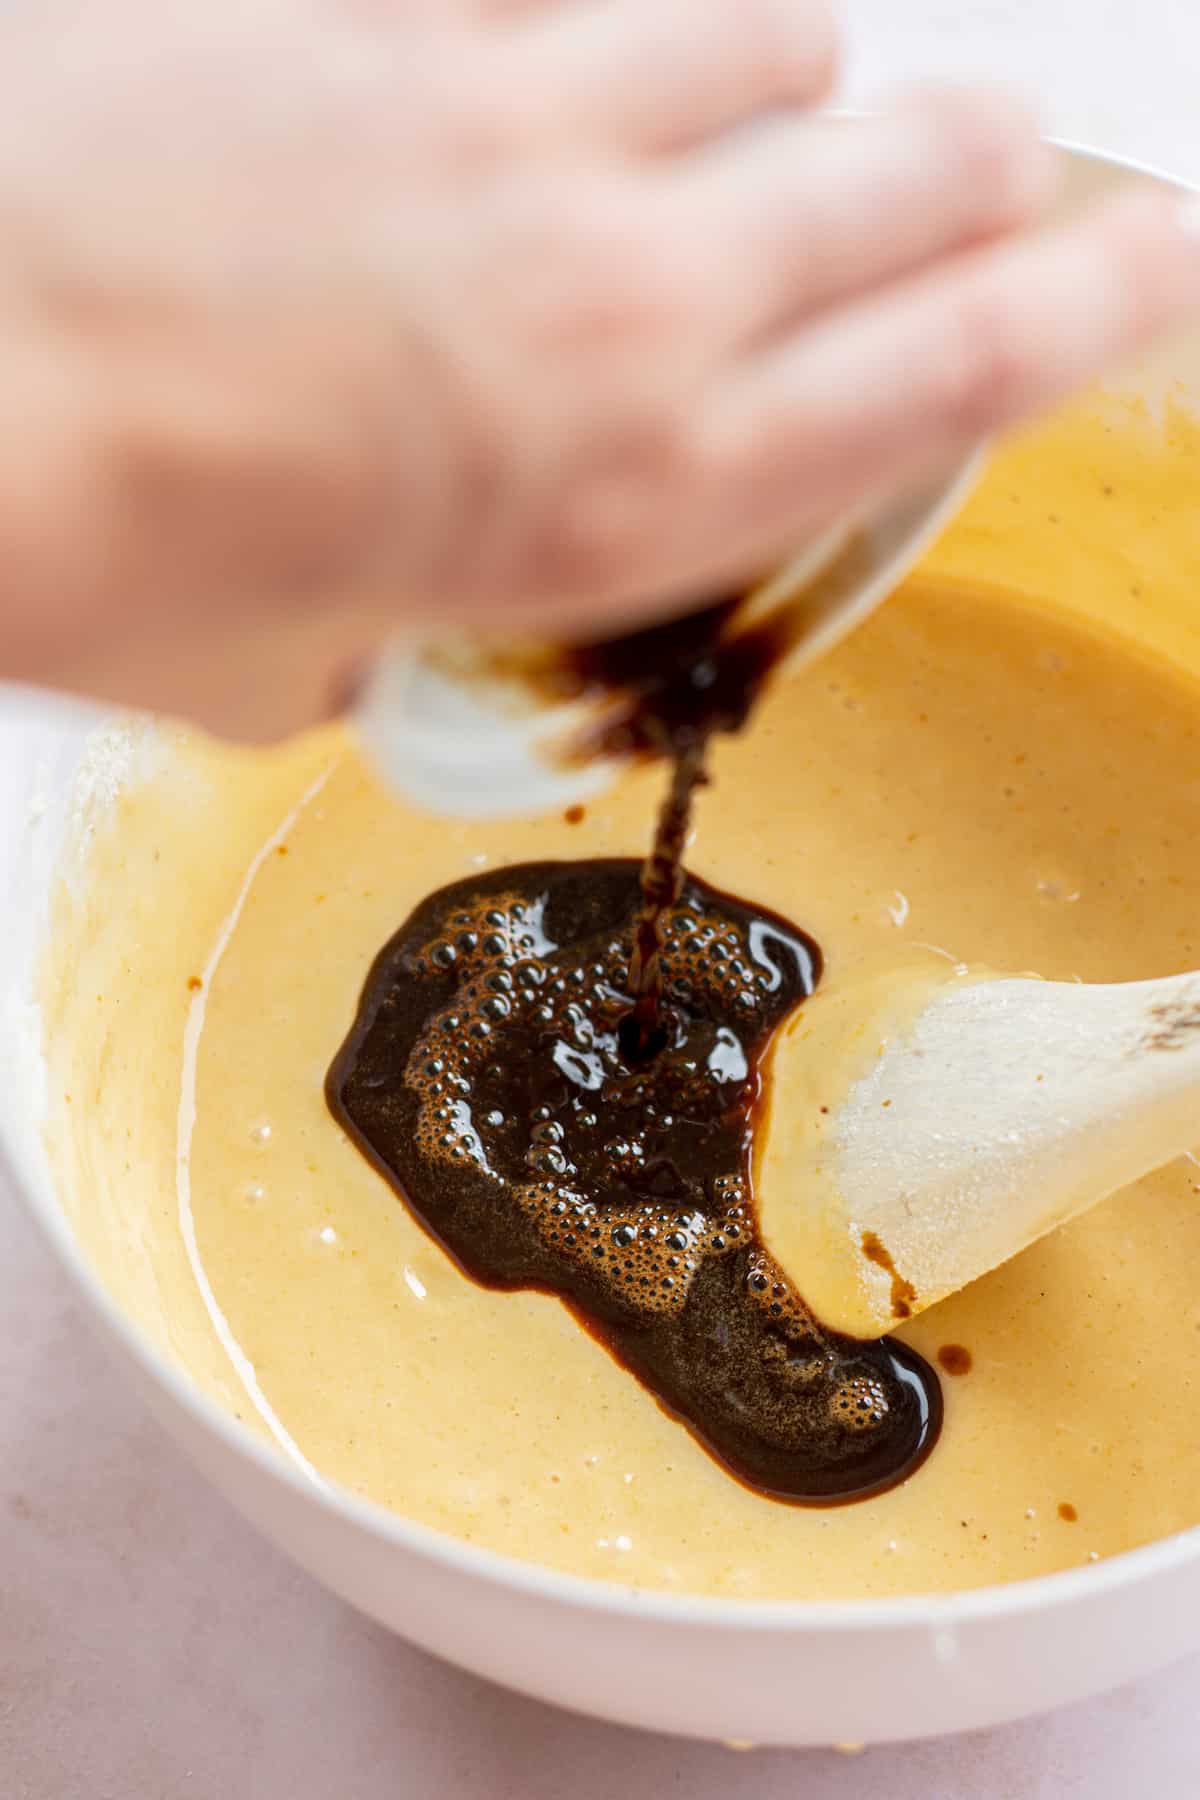 coffee poured into cake batter.